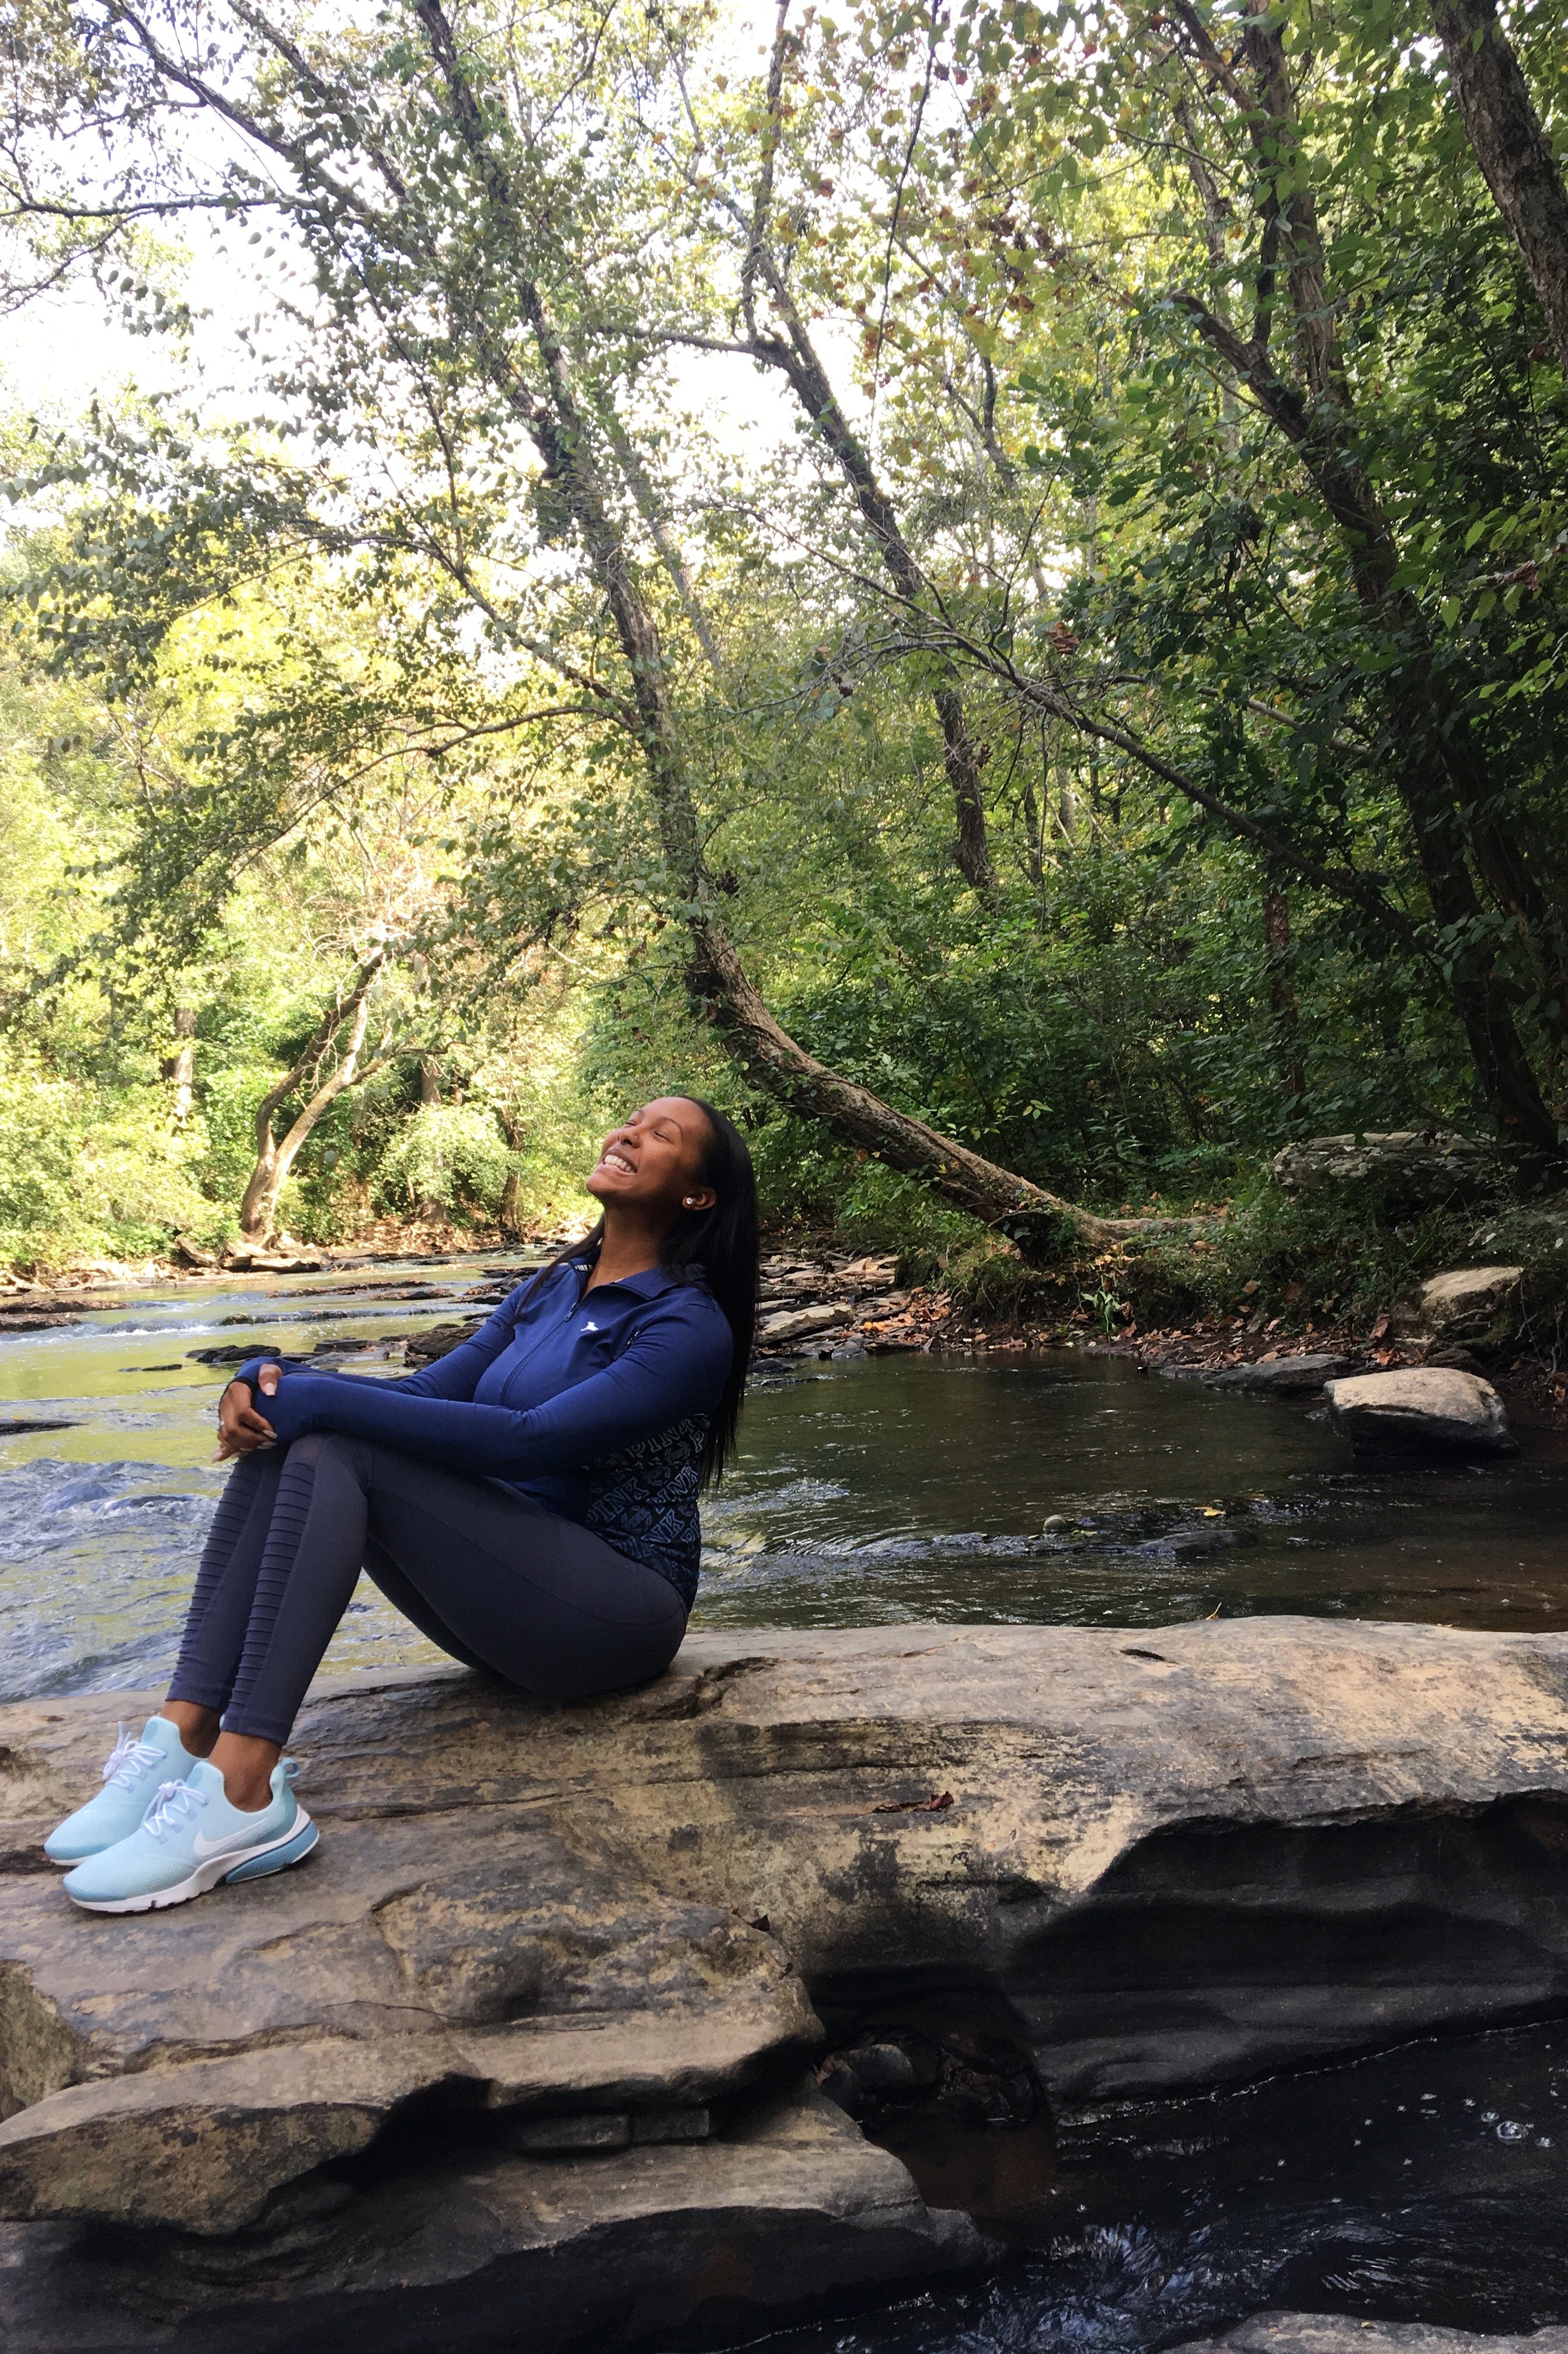 side profile of a person smiling and slightly leaning back while seated on a large rock in the middle of a creek surrounded by trees with green leaves. The person is wearing light-colored sneakers, grey leggings and dark blue long-sleeved shirt.